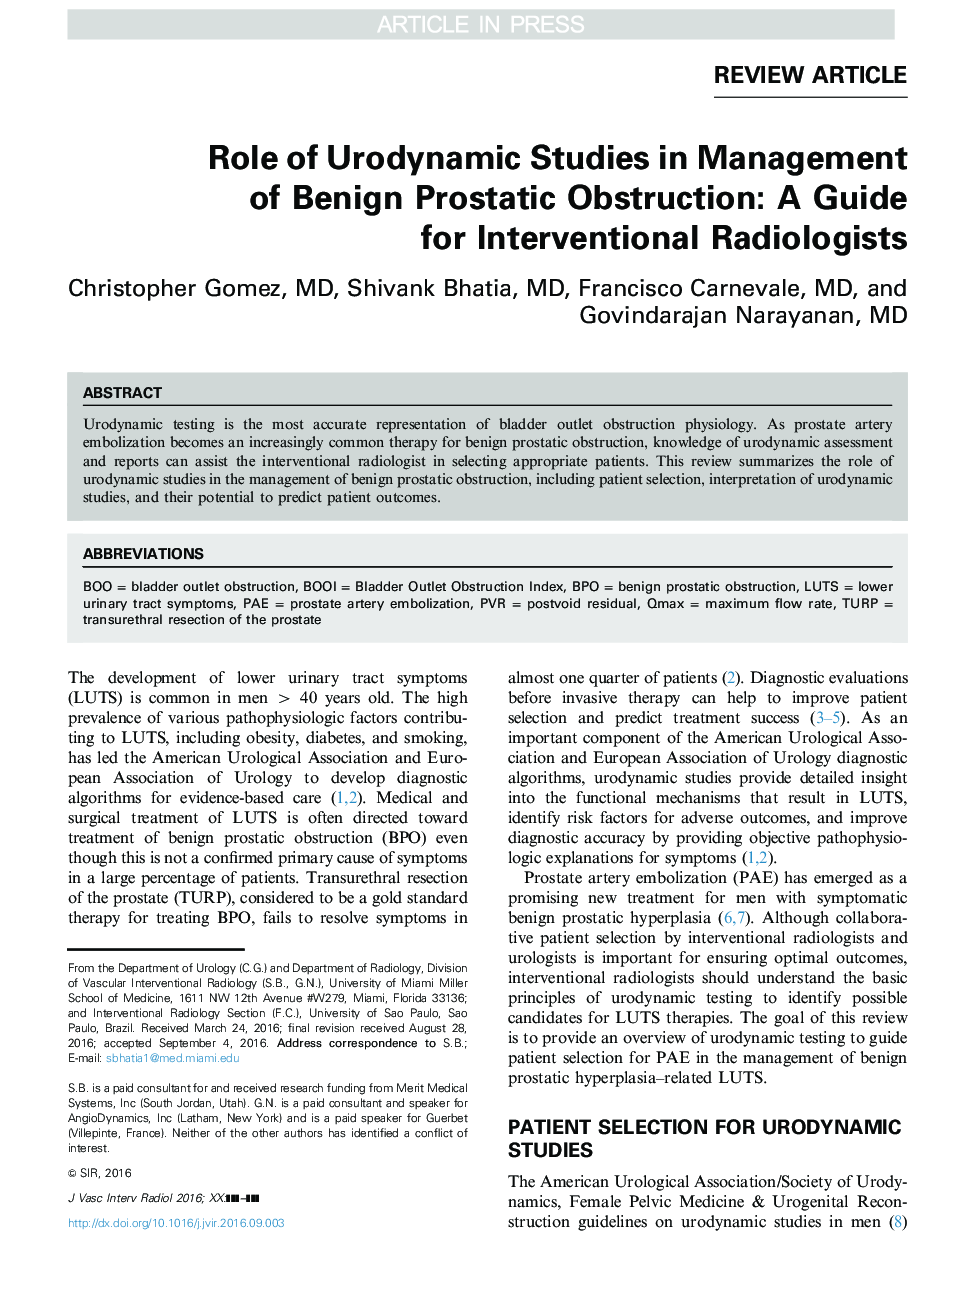 Role of Urodynamic Studies in Management of Benign Prostatic Obstruction: A Guide for Interventional Radiologists